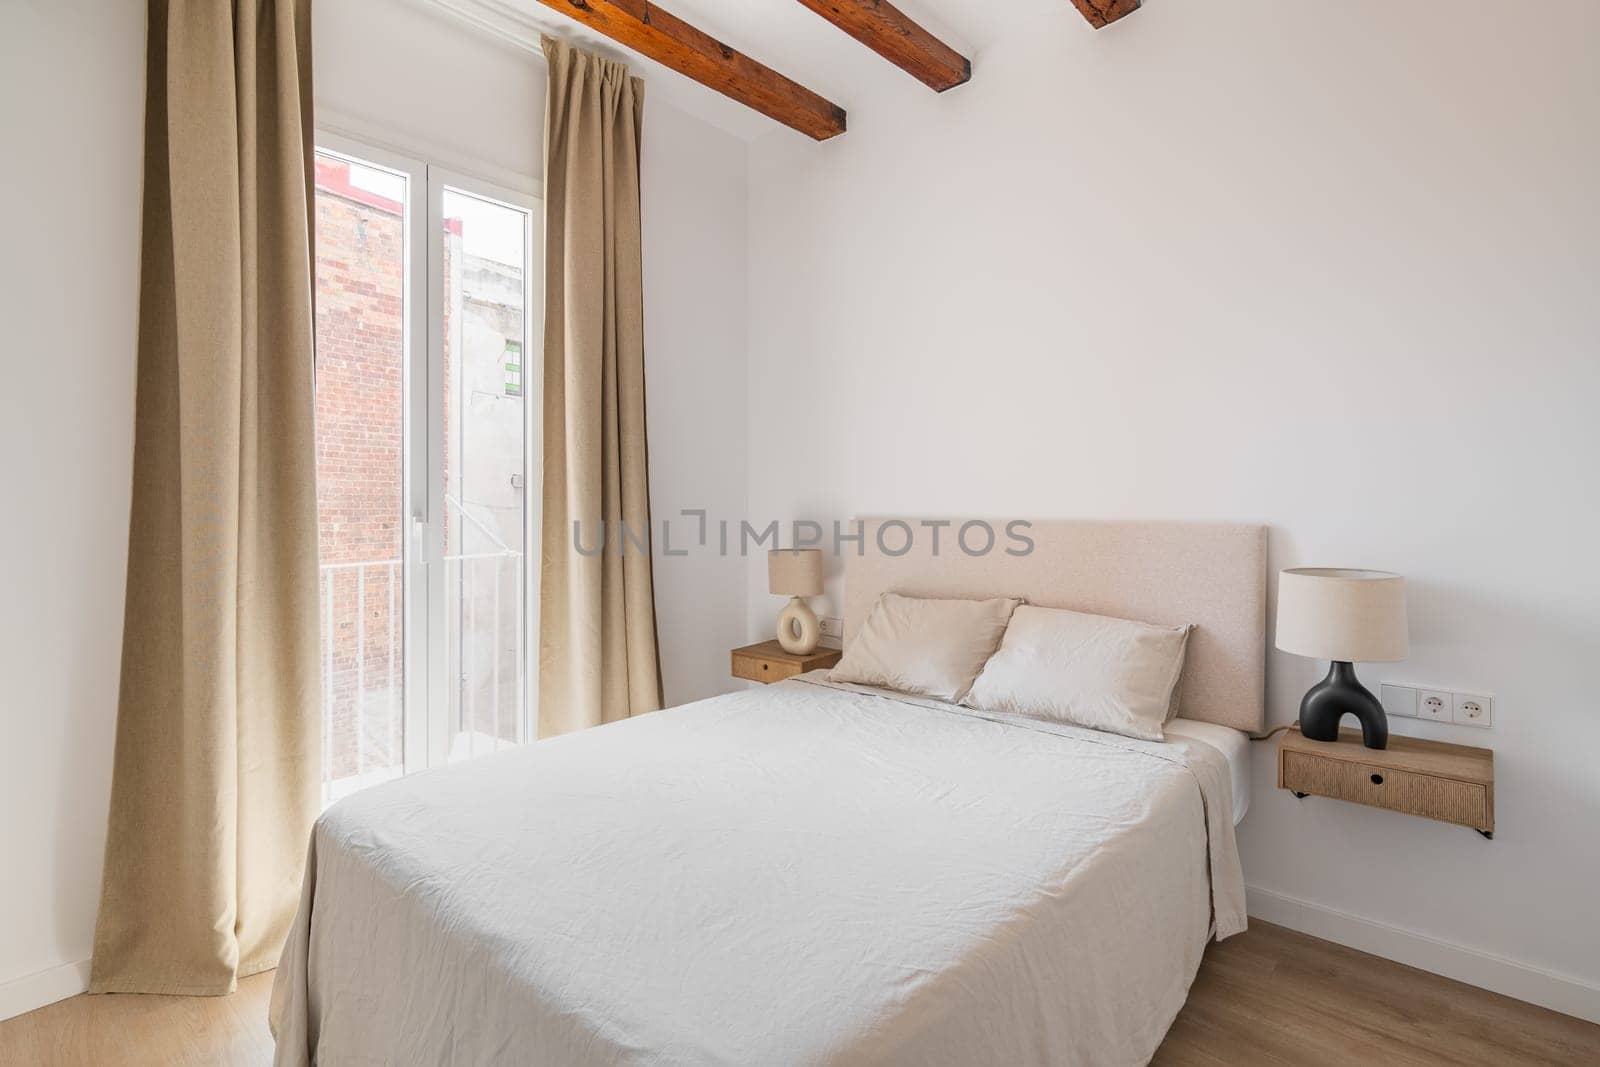 Large double bed with light linens. Spacious light bedroom with a large window to the floor. Concept of big apartment in a new building after renovation. Copyspace.